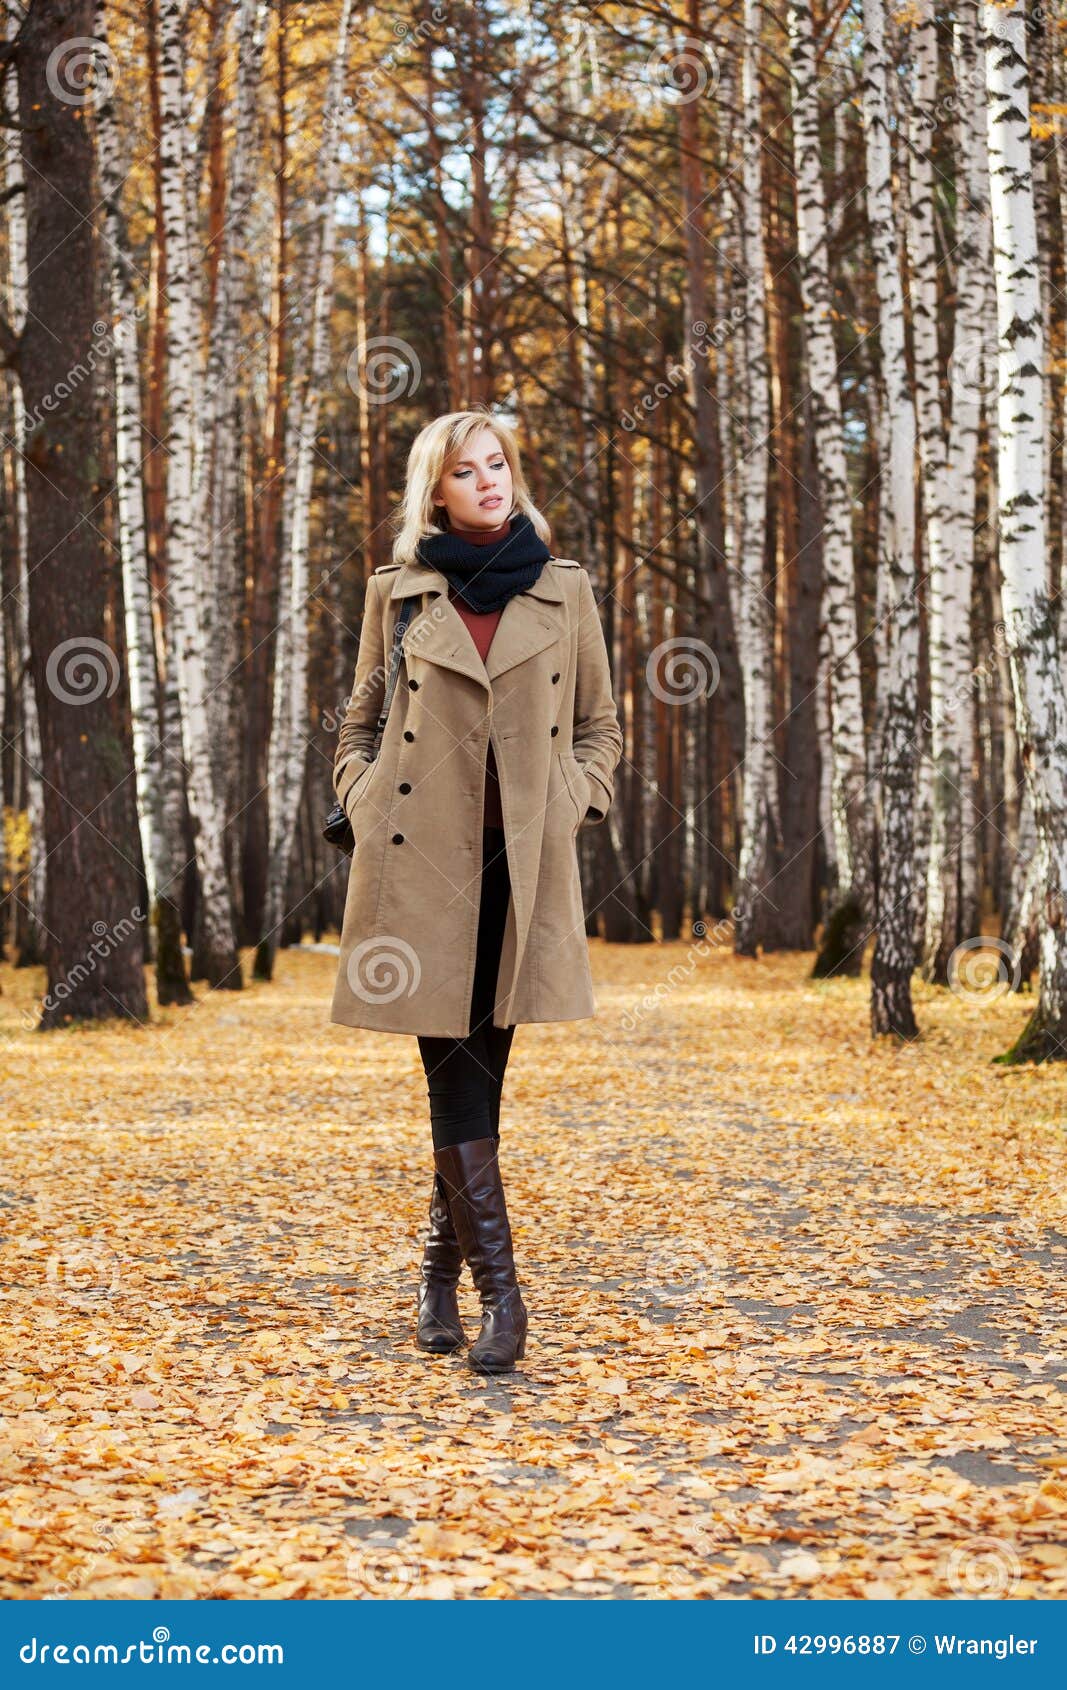 961 Young Blond Fashion Woman Walking Autumn Forest Stock Photos - Free &  Royalty-Free Stock Photos from Dreamstime